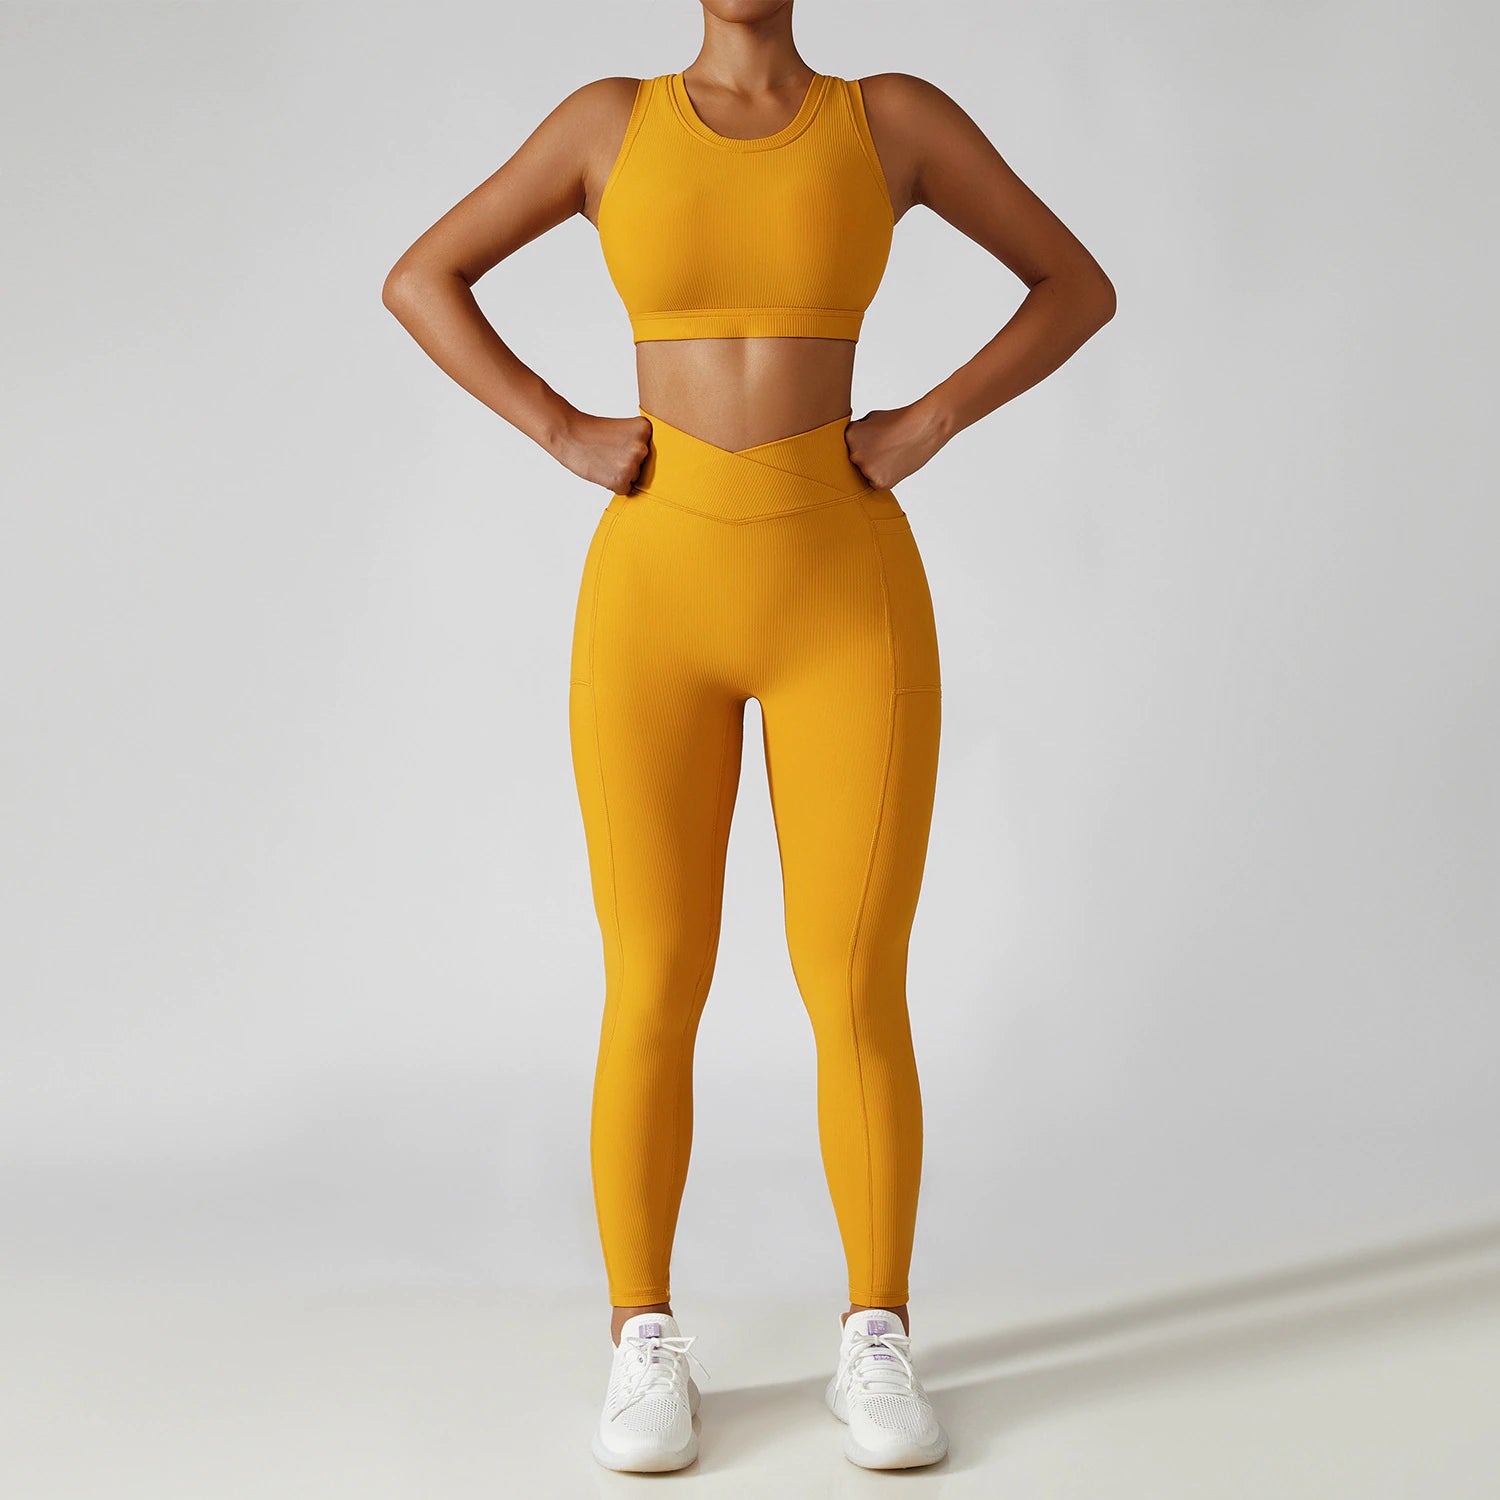 Rush Famulily Sexy Workout Outfit for Women ,Summer Casual Gym Workout  Running Tracksuit Outfits Sportswear Yoga Clothes-Yellow(S) S1238 